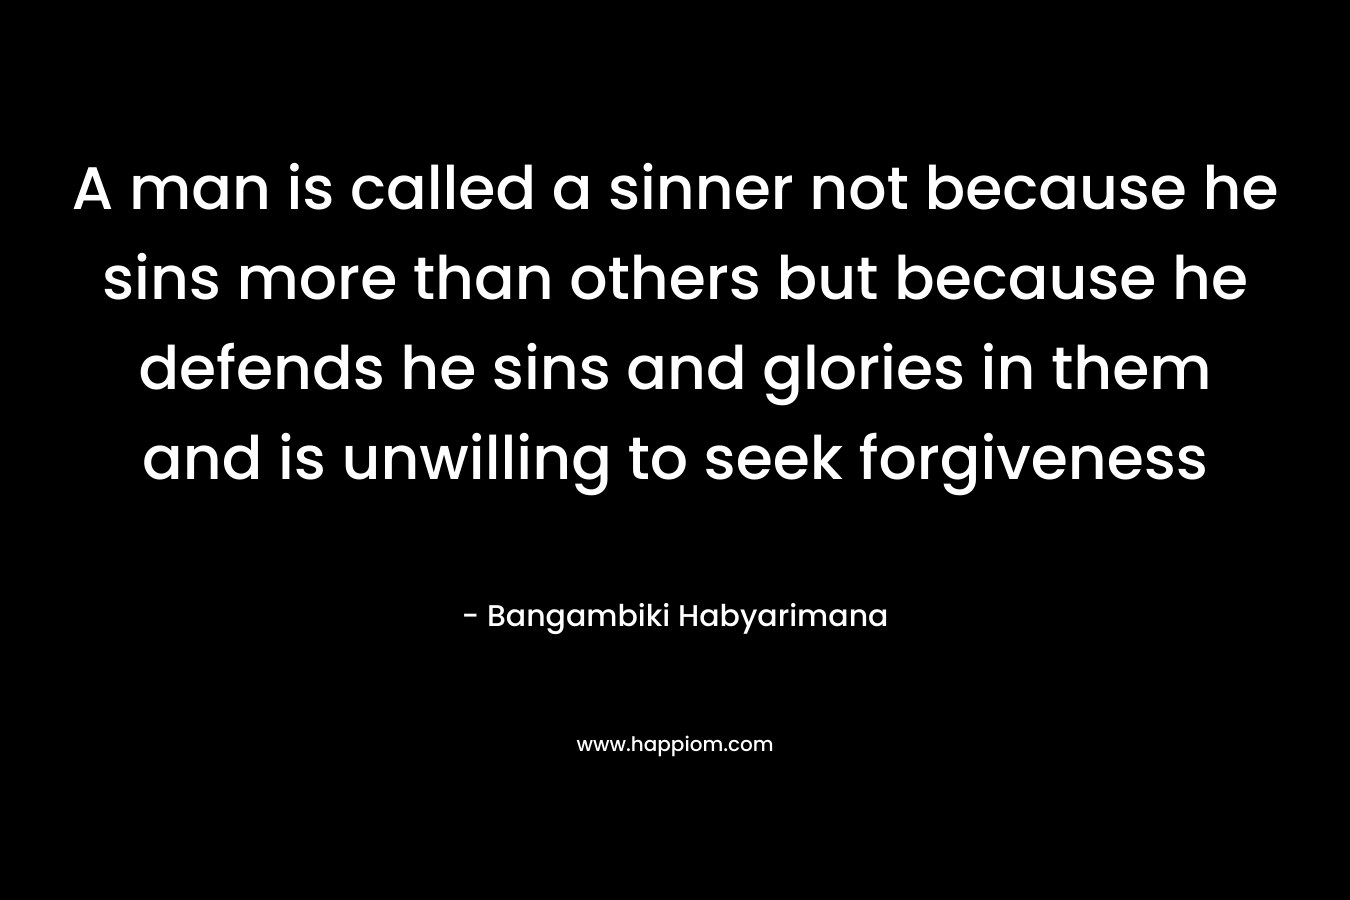 A man is called a sinner not because he sins more than others but because he defends he sins and glories in them and is unwilling to seek forgiveness